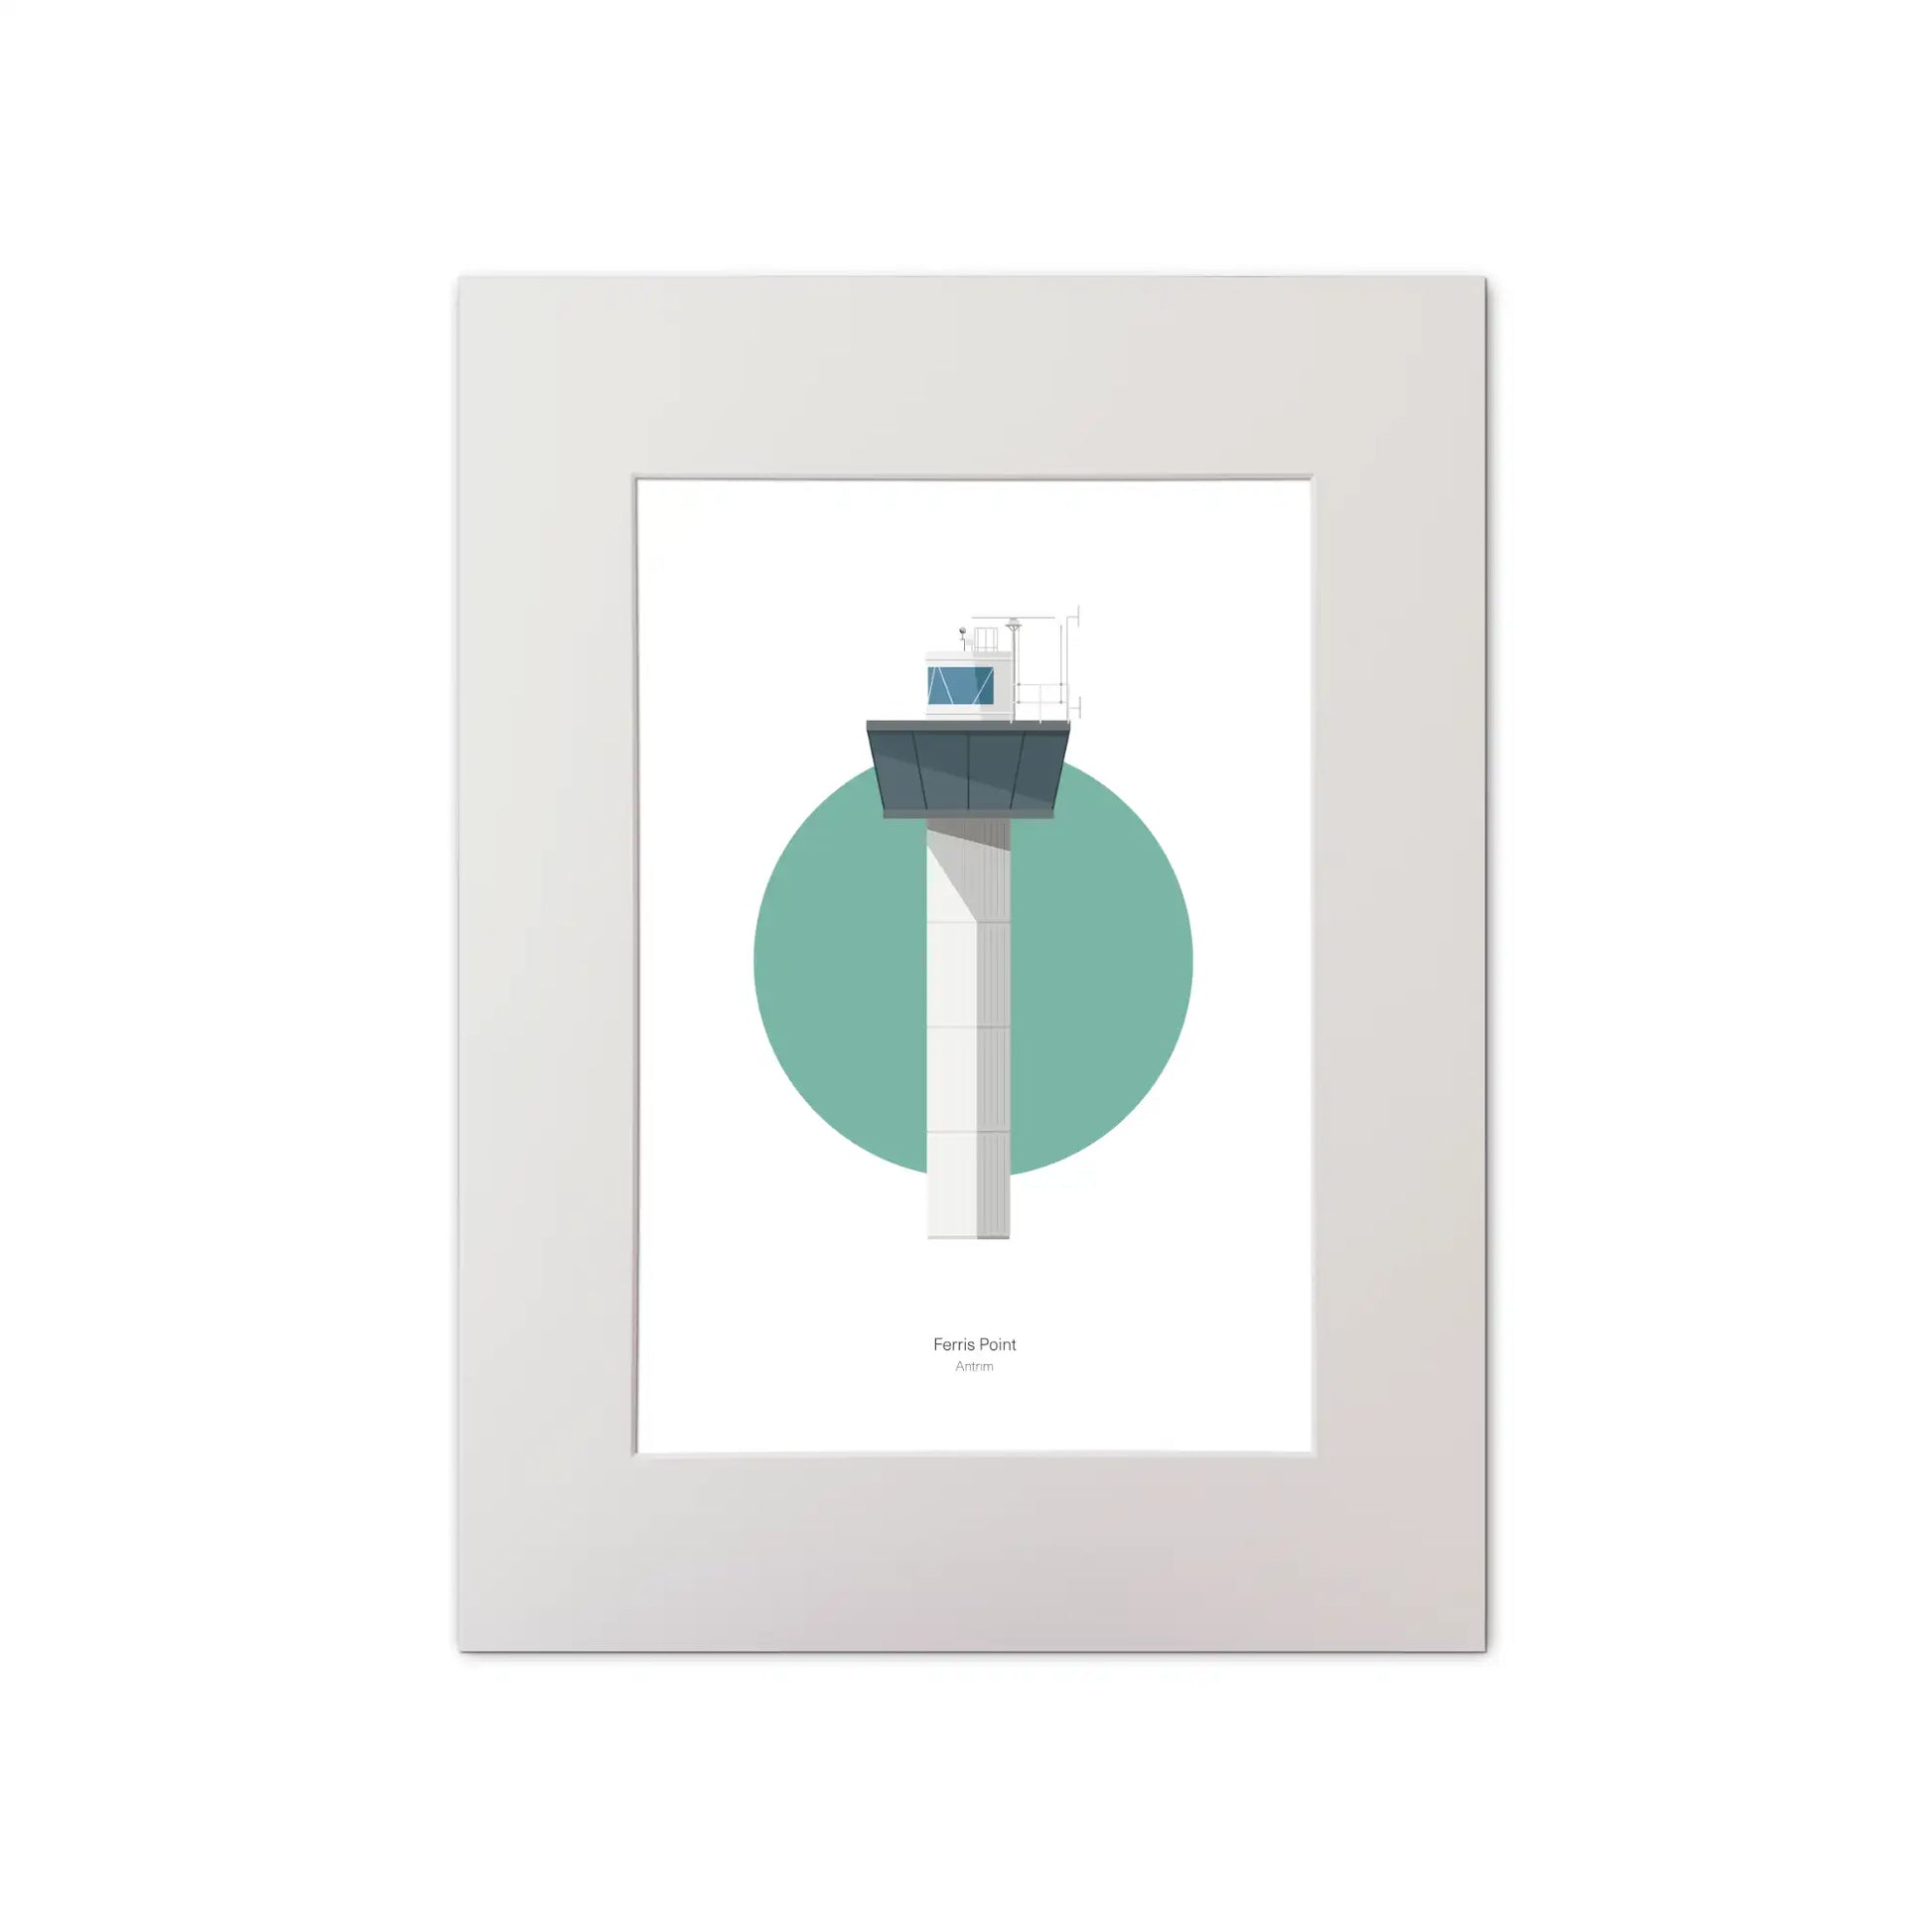 Contemporary graphic illustration of Ferris Point lighthouse on a white background inside light blue square, mounted and measuring 30x40cm.